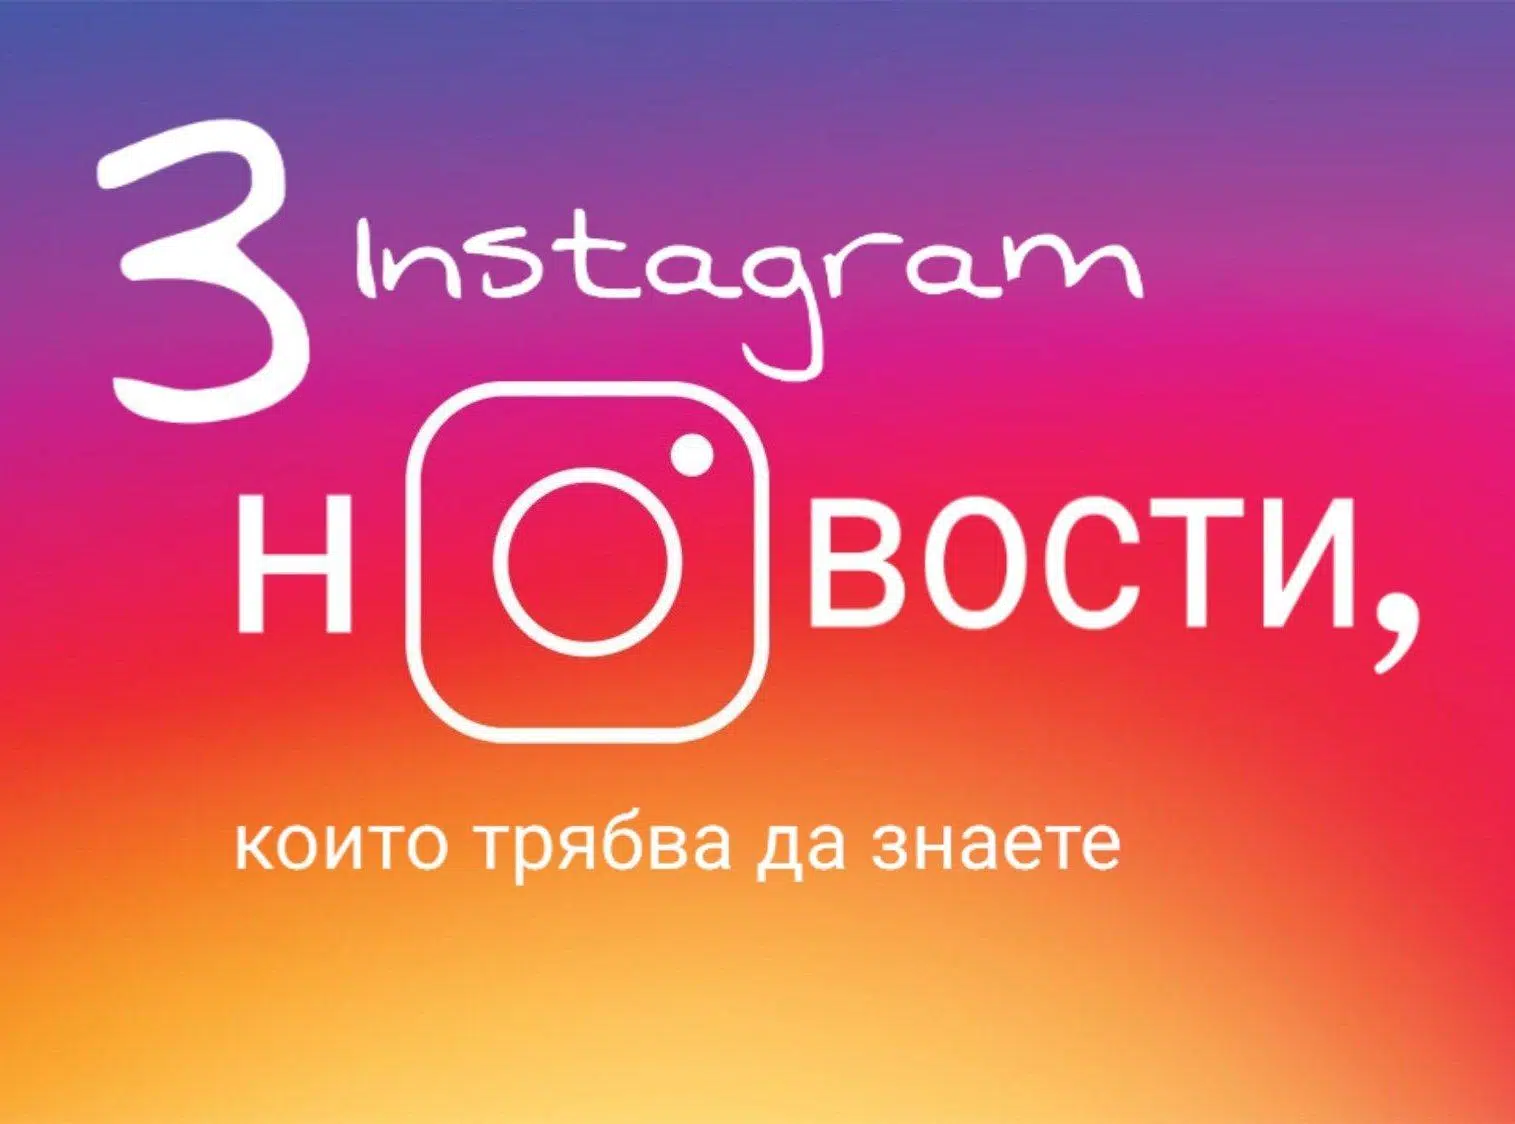 3 Instagram updates you should know